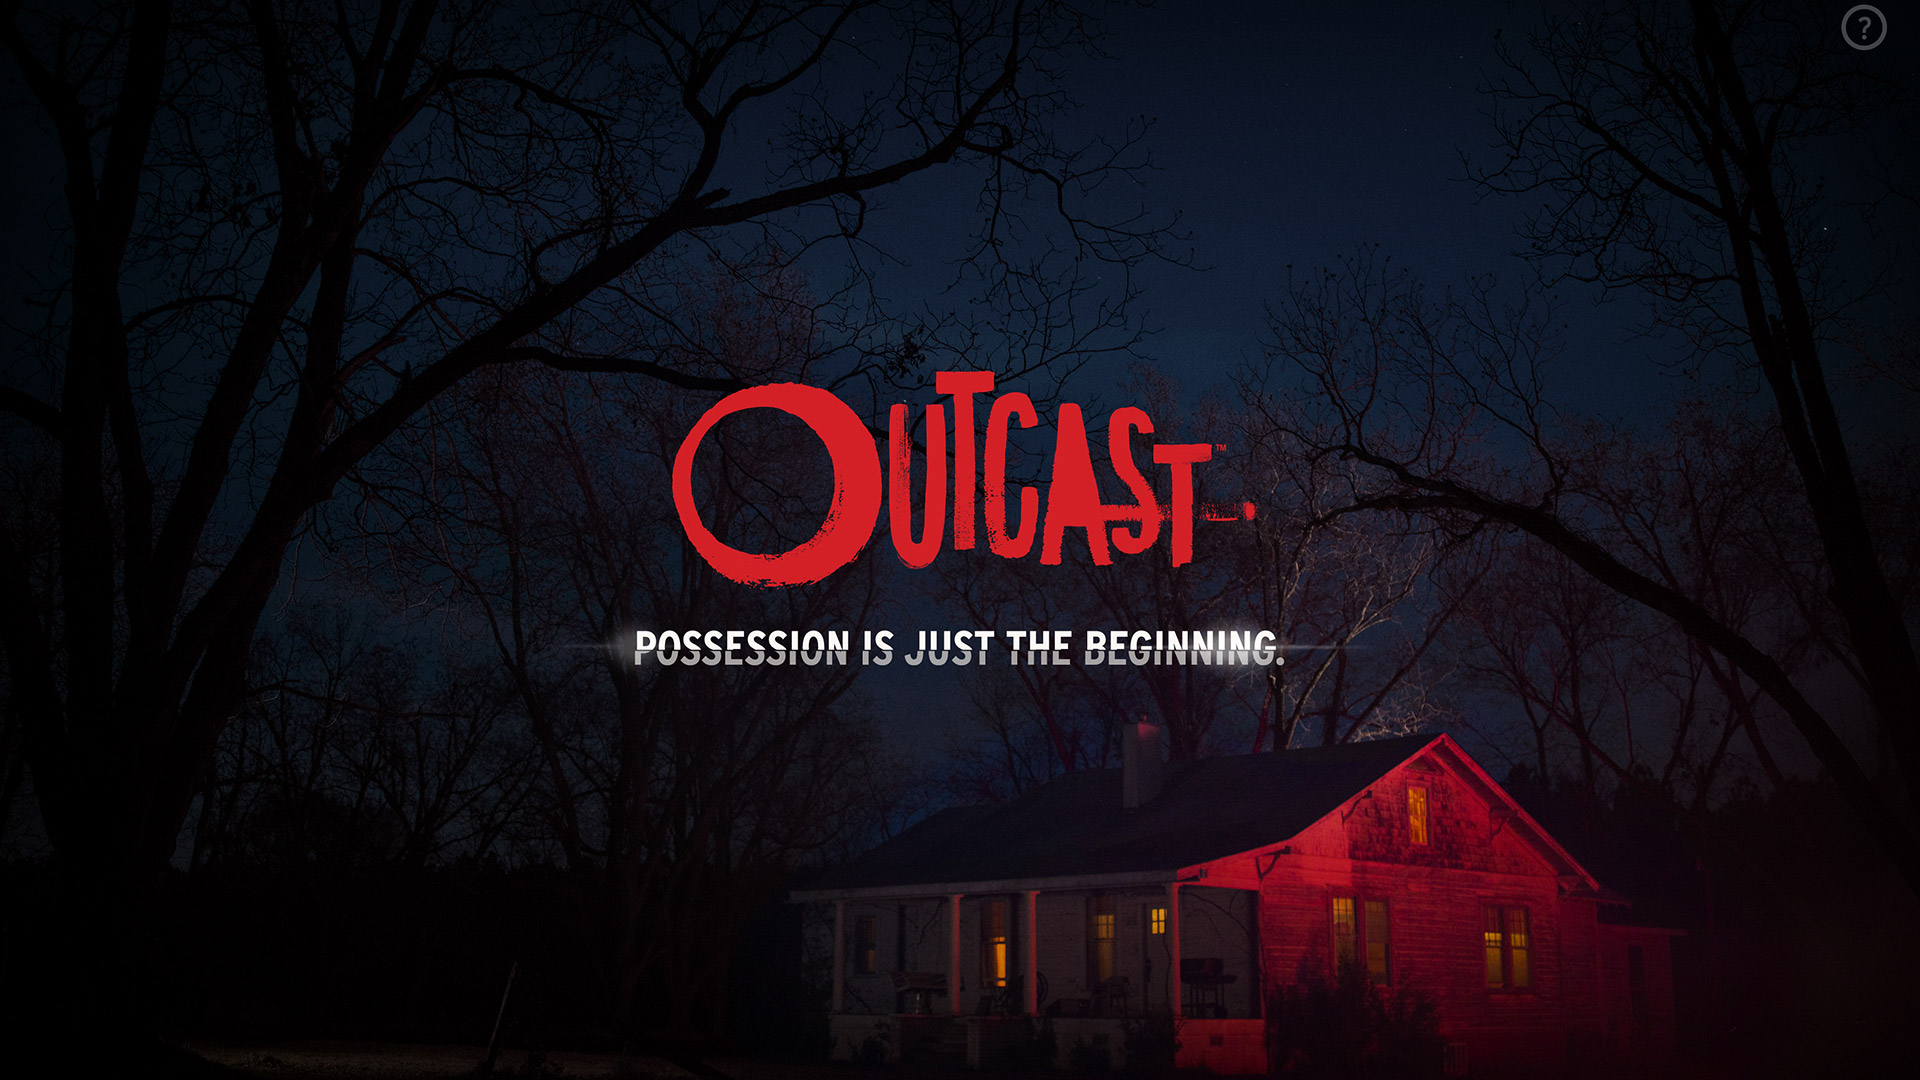 Outcast Interactive Trailer: “Possession Begins”